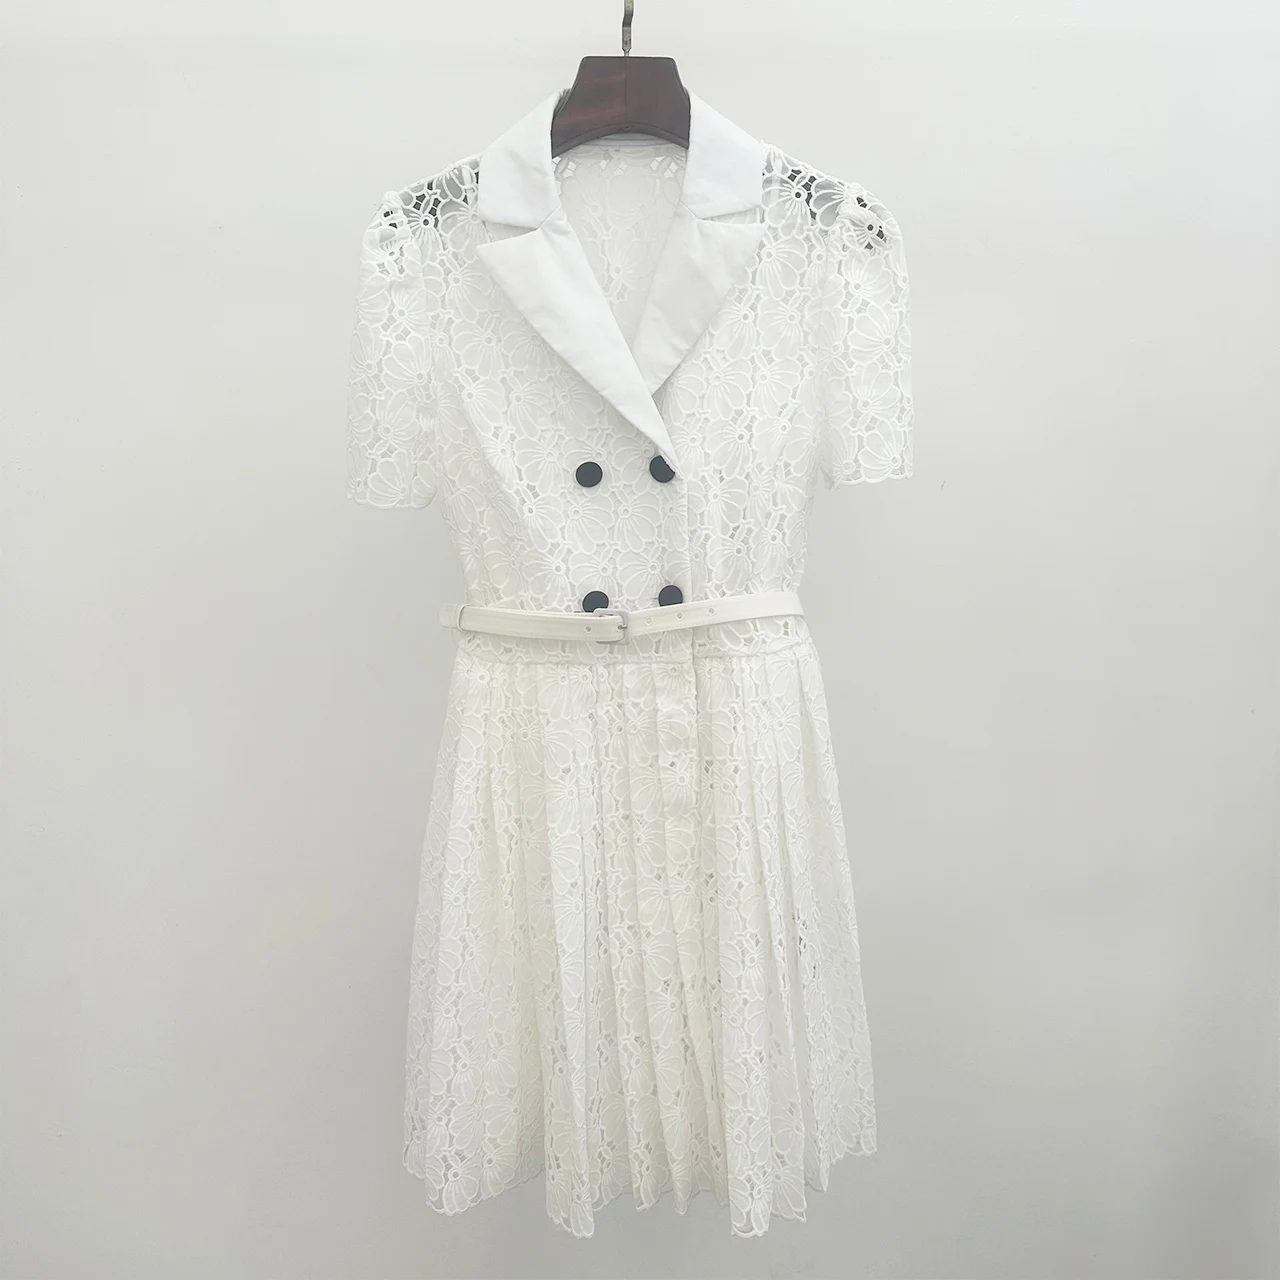 Summer new College age-reduction Sweet lace floral embroidery lapel double-breasted waist dress6.26